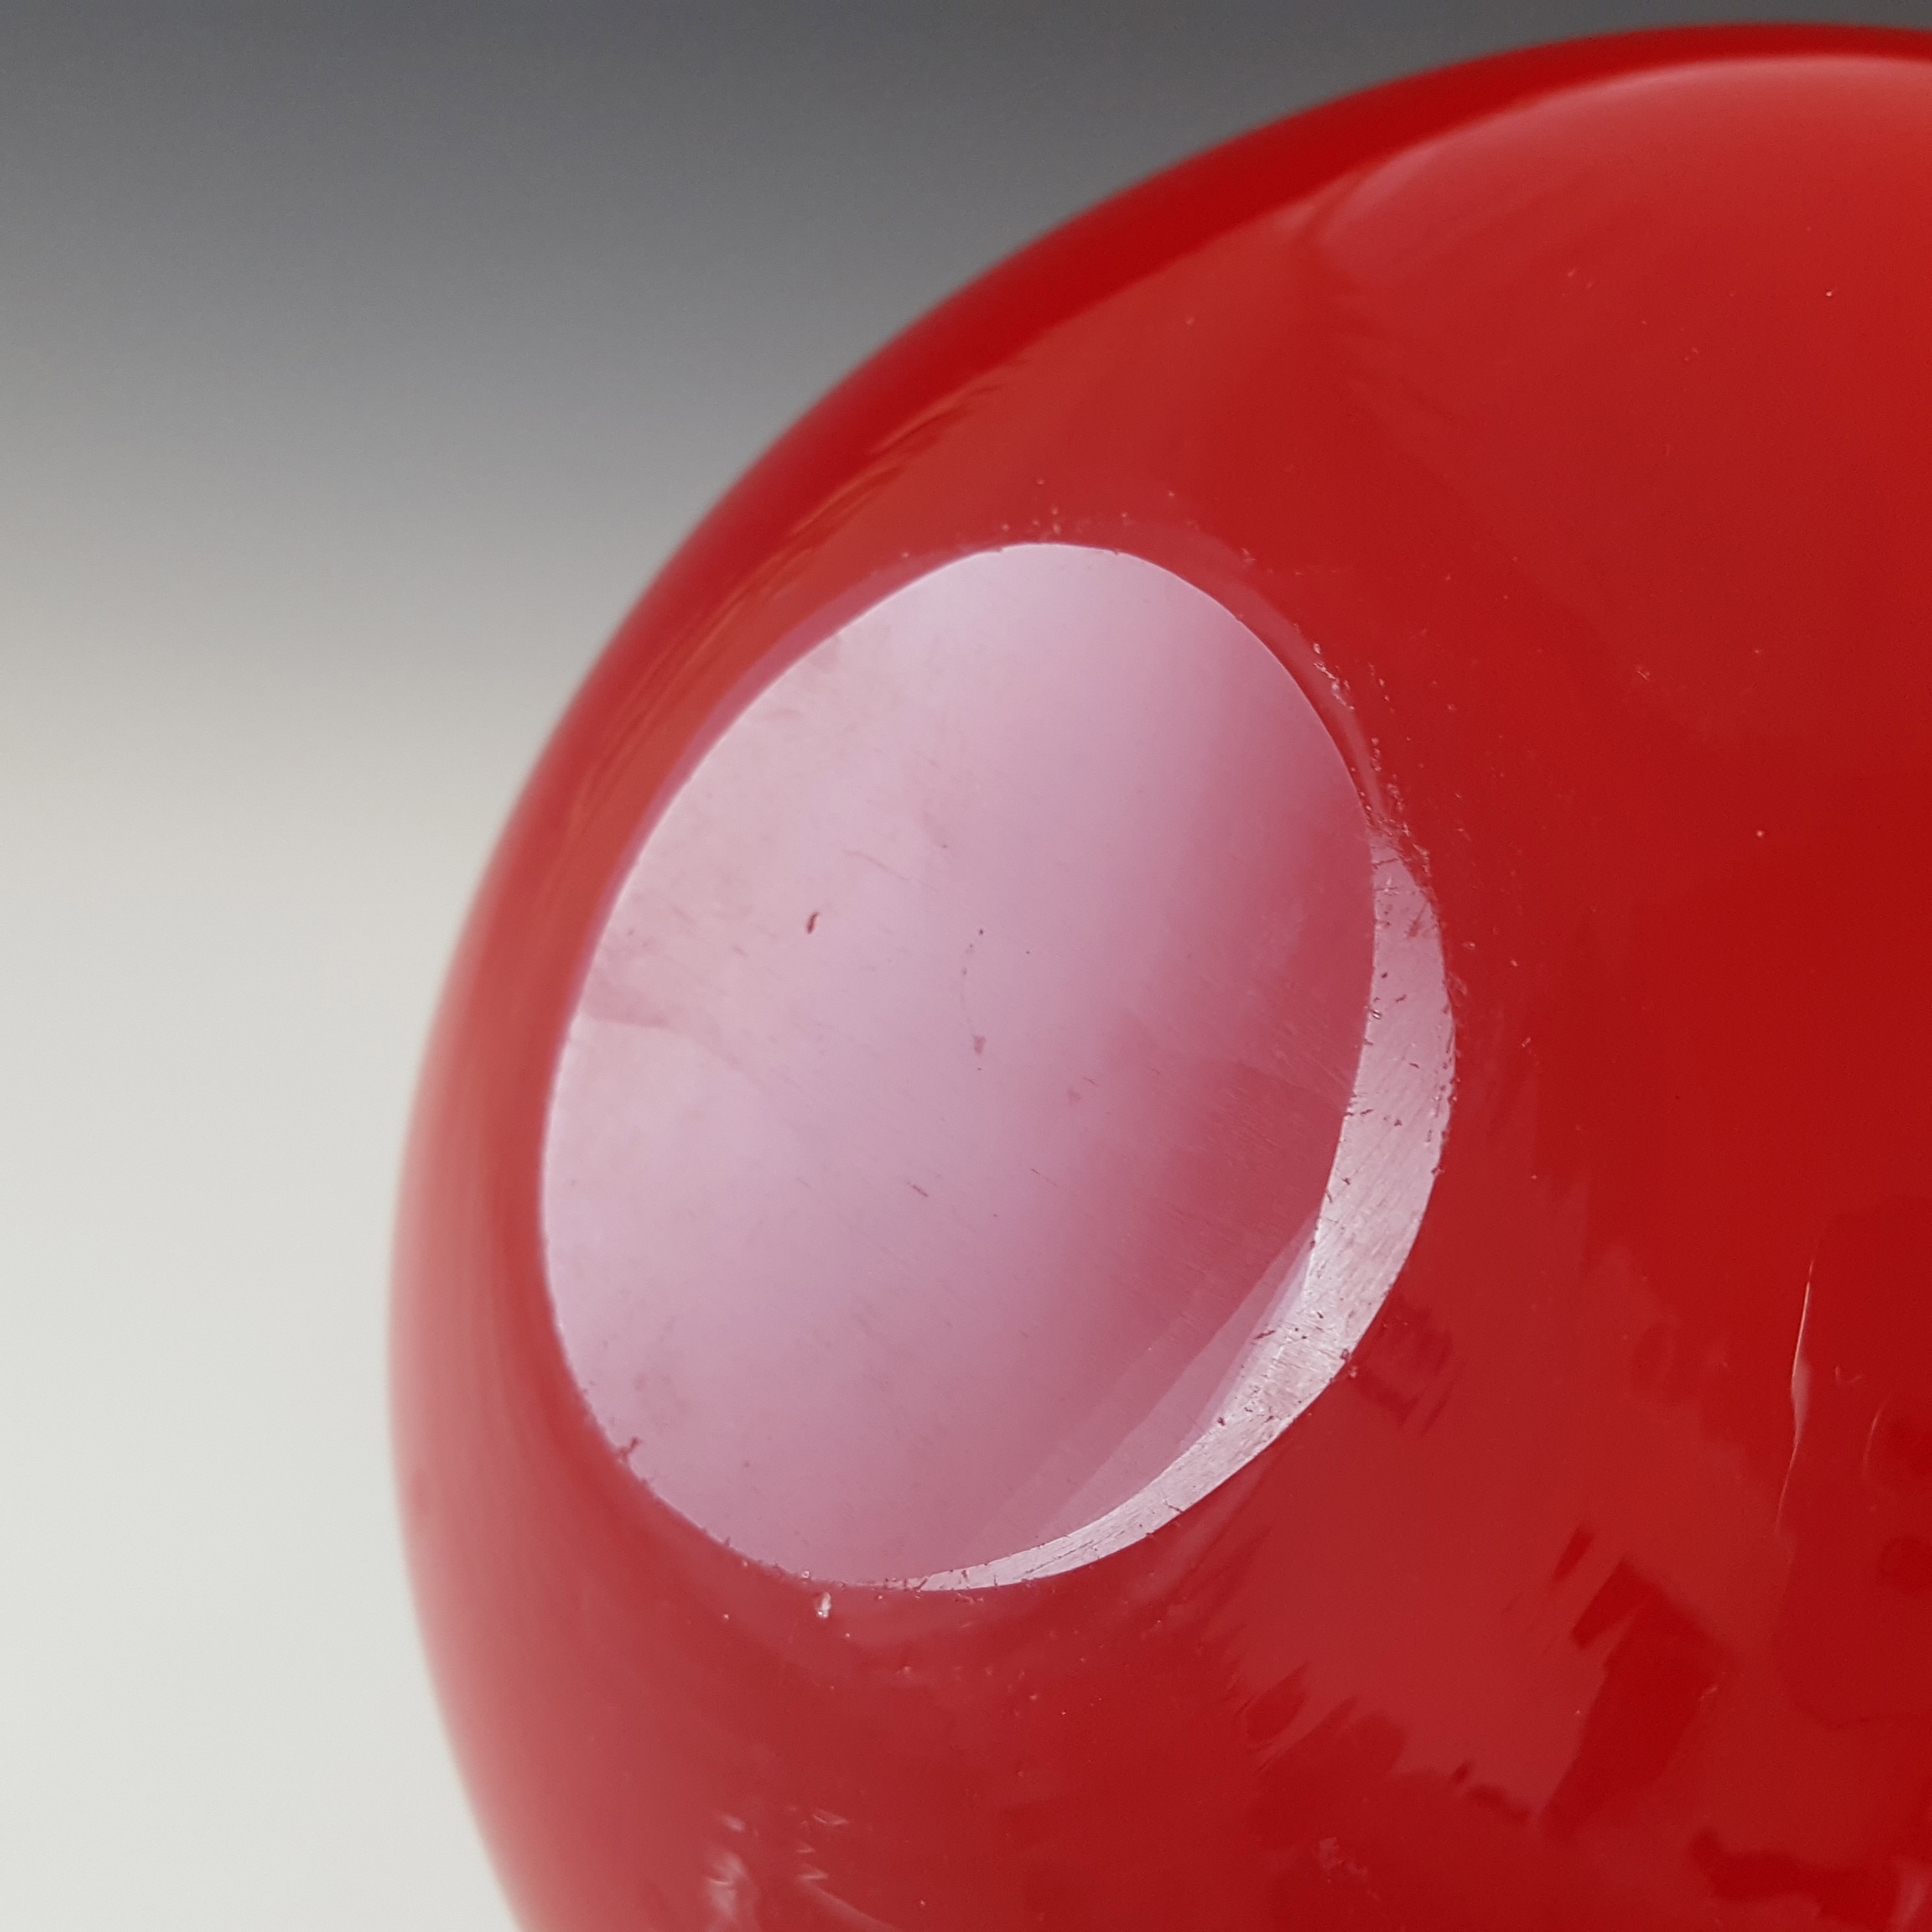 Japanese Red & White Cased Glass 'Wales' Biomorphic Bowl - Click Image to Close